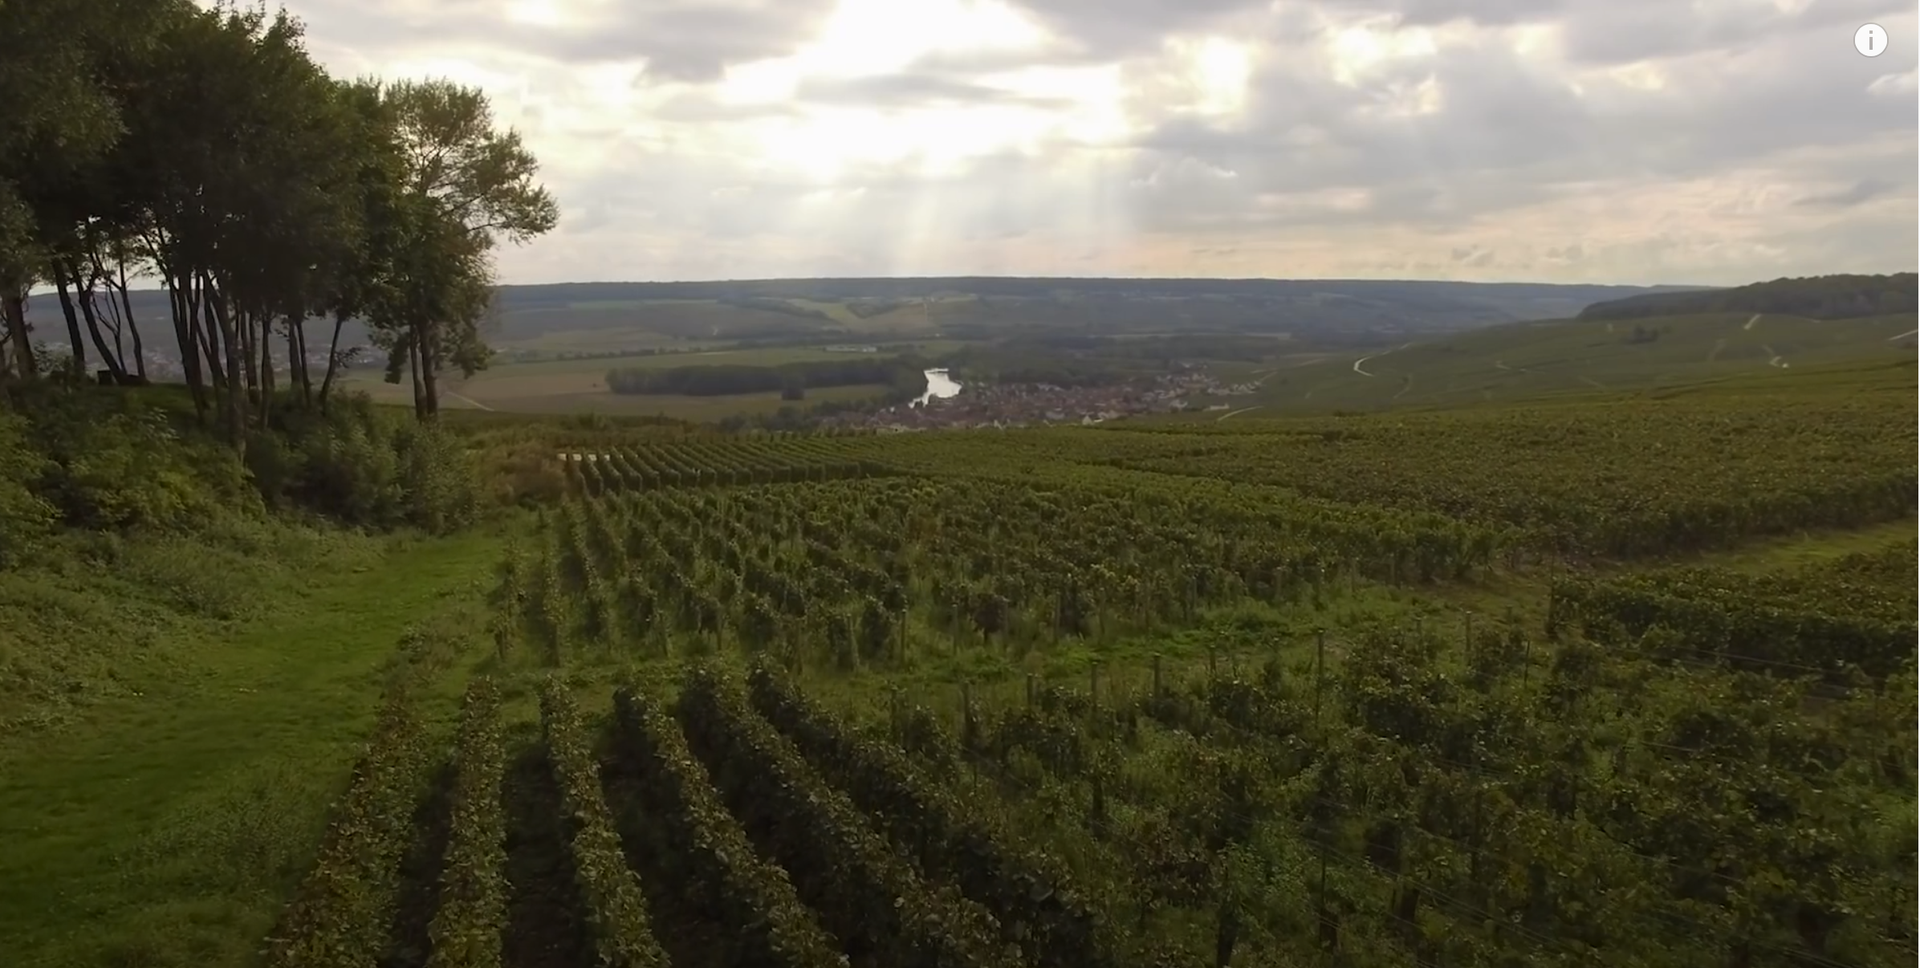 Where Does Champagne Come From? | A Brief History of Champagne